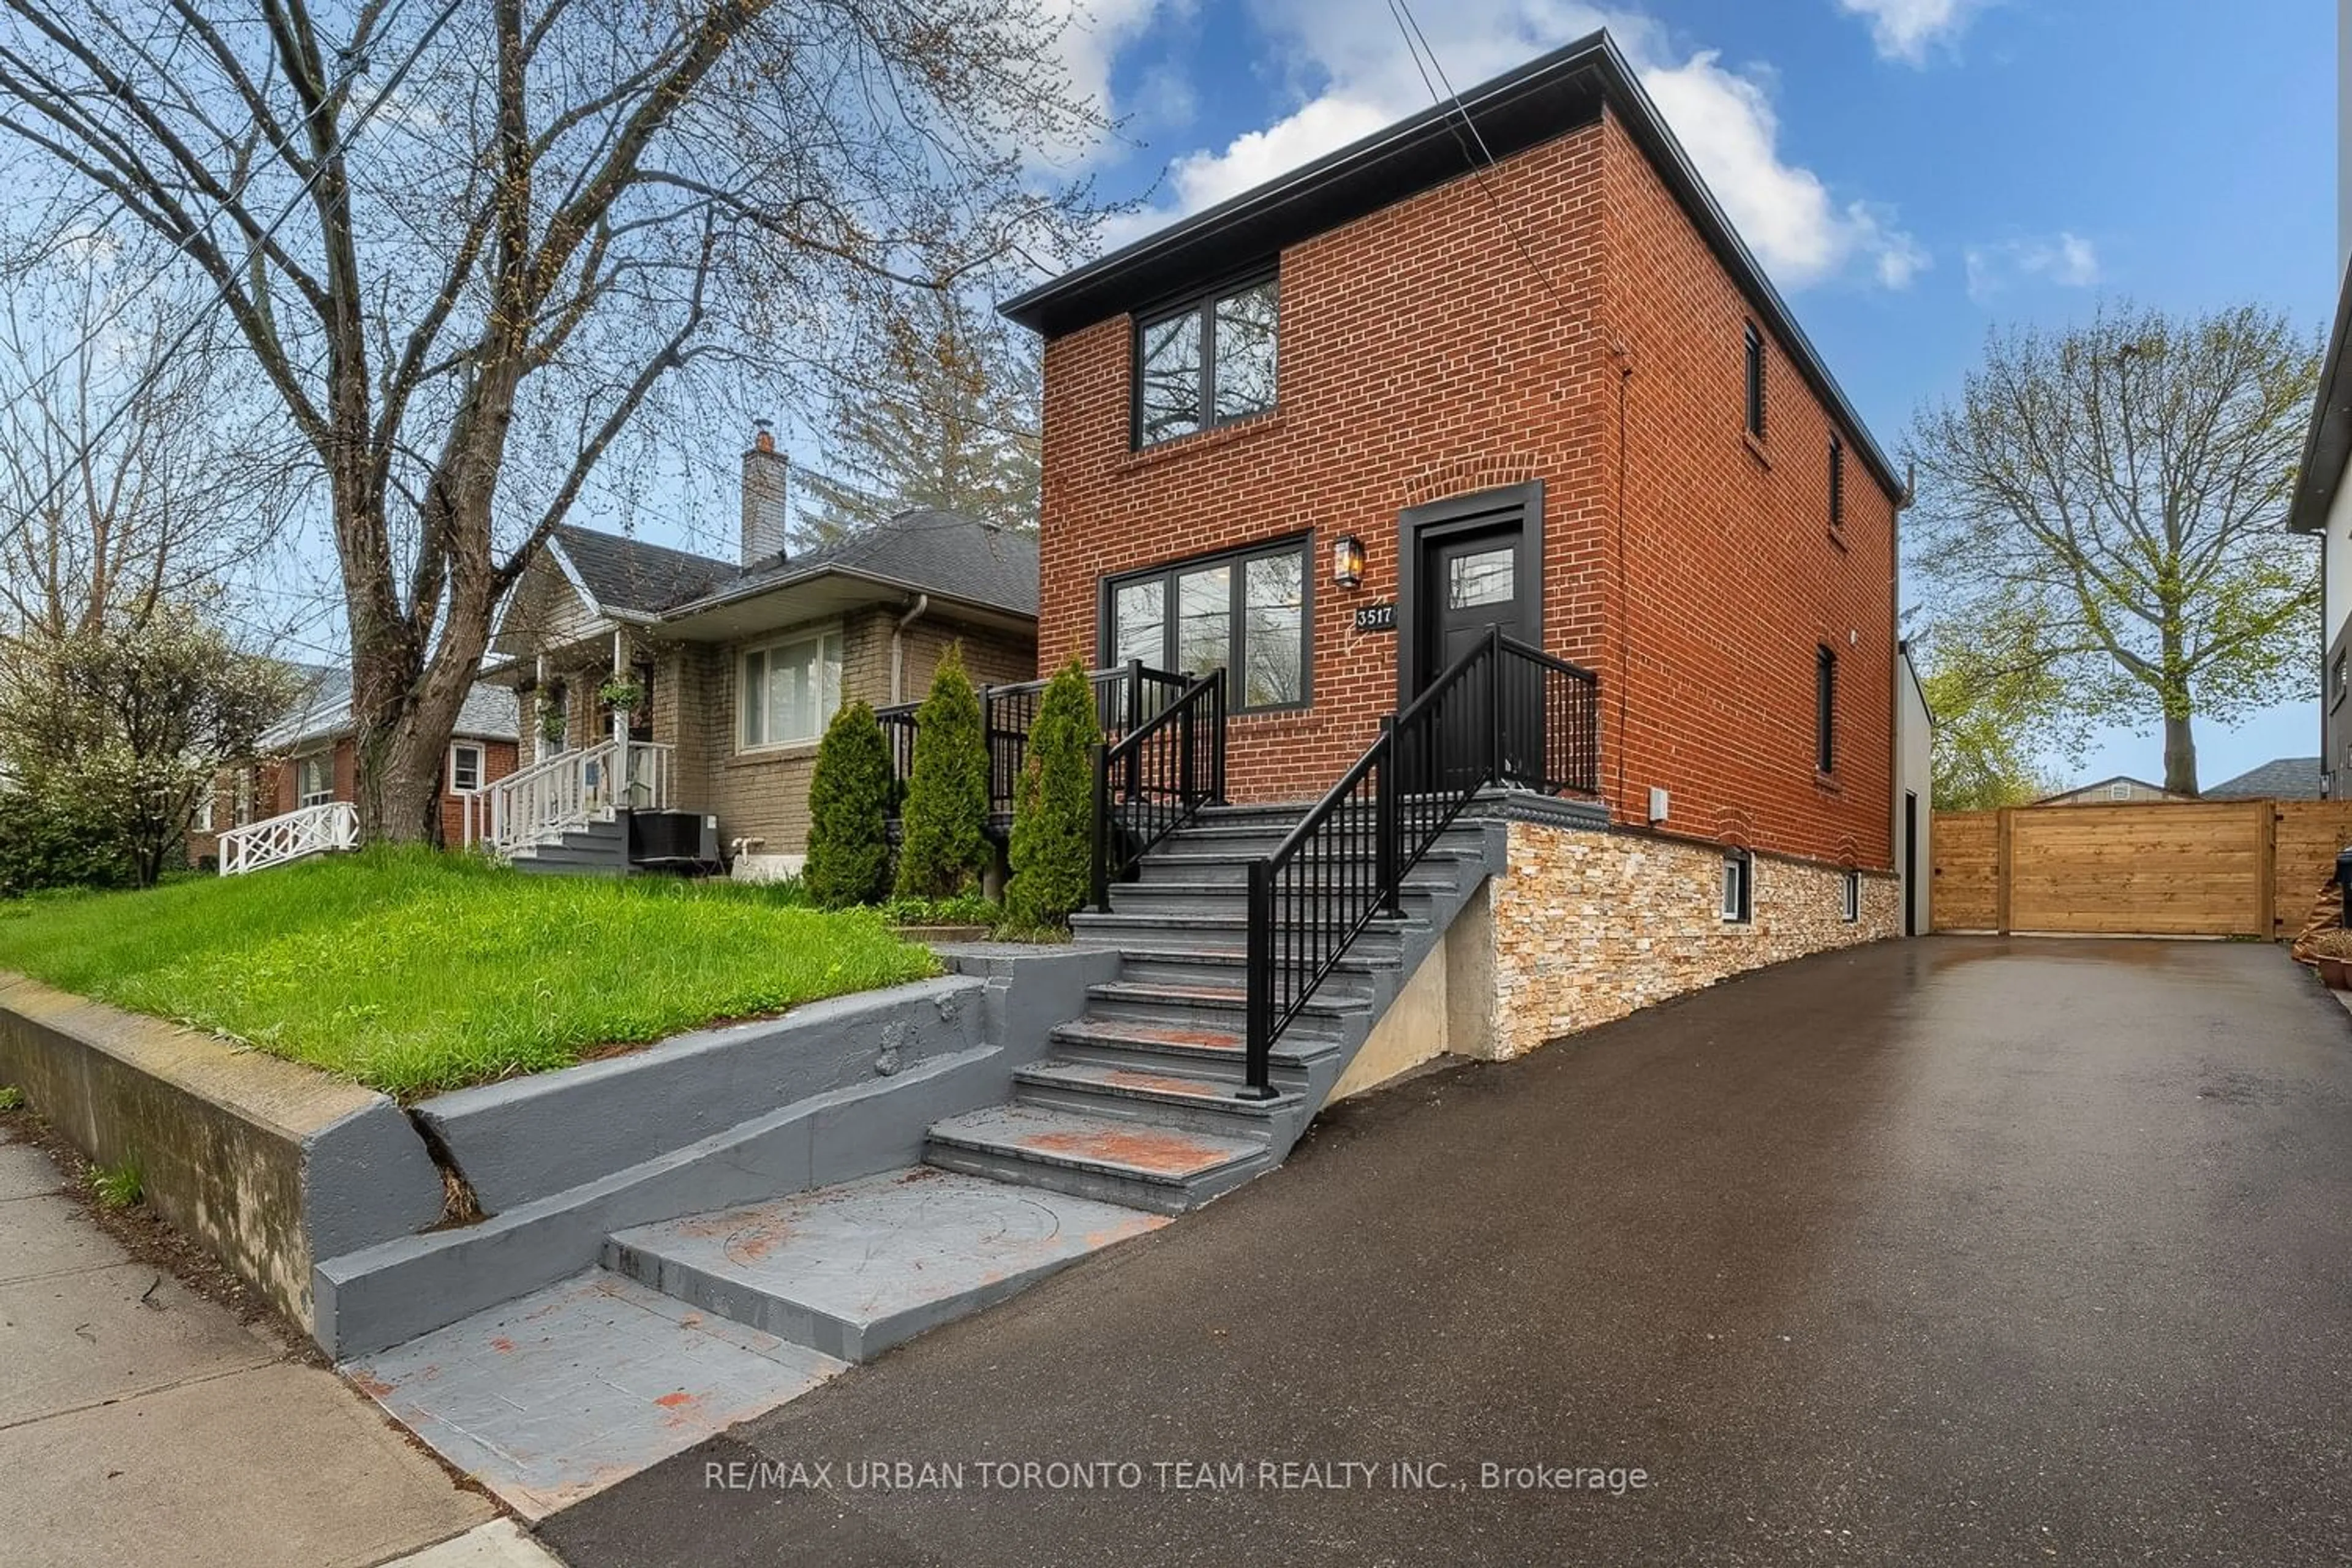 Home with brick exterior material for 3517 St Clair Ave, Toronto Ontario M1K 1L4